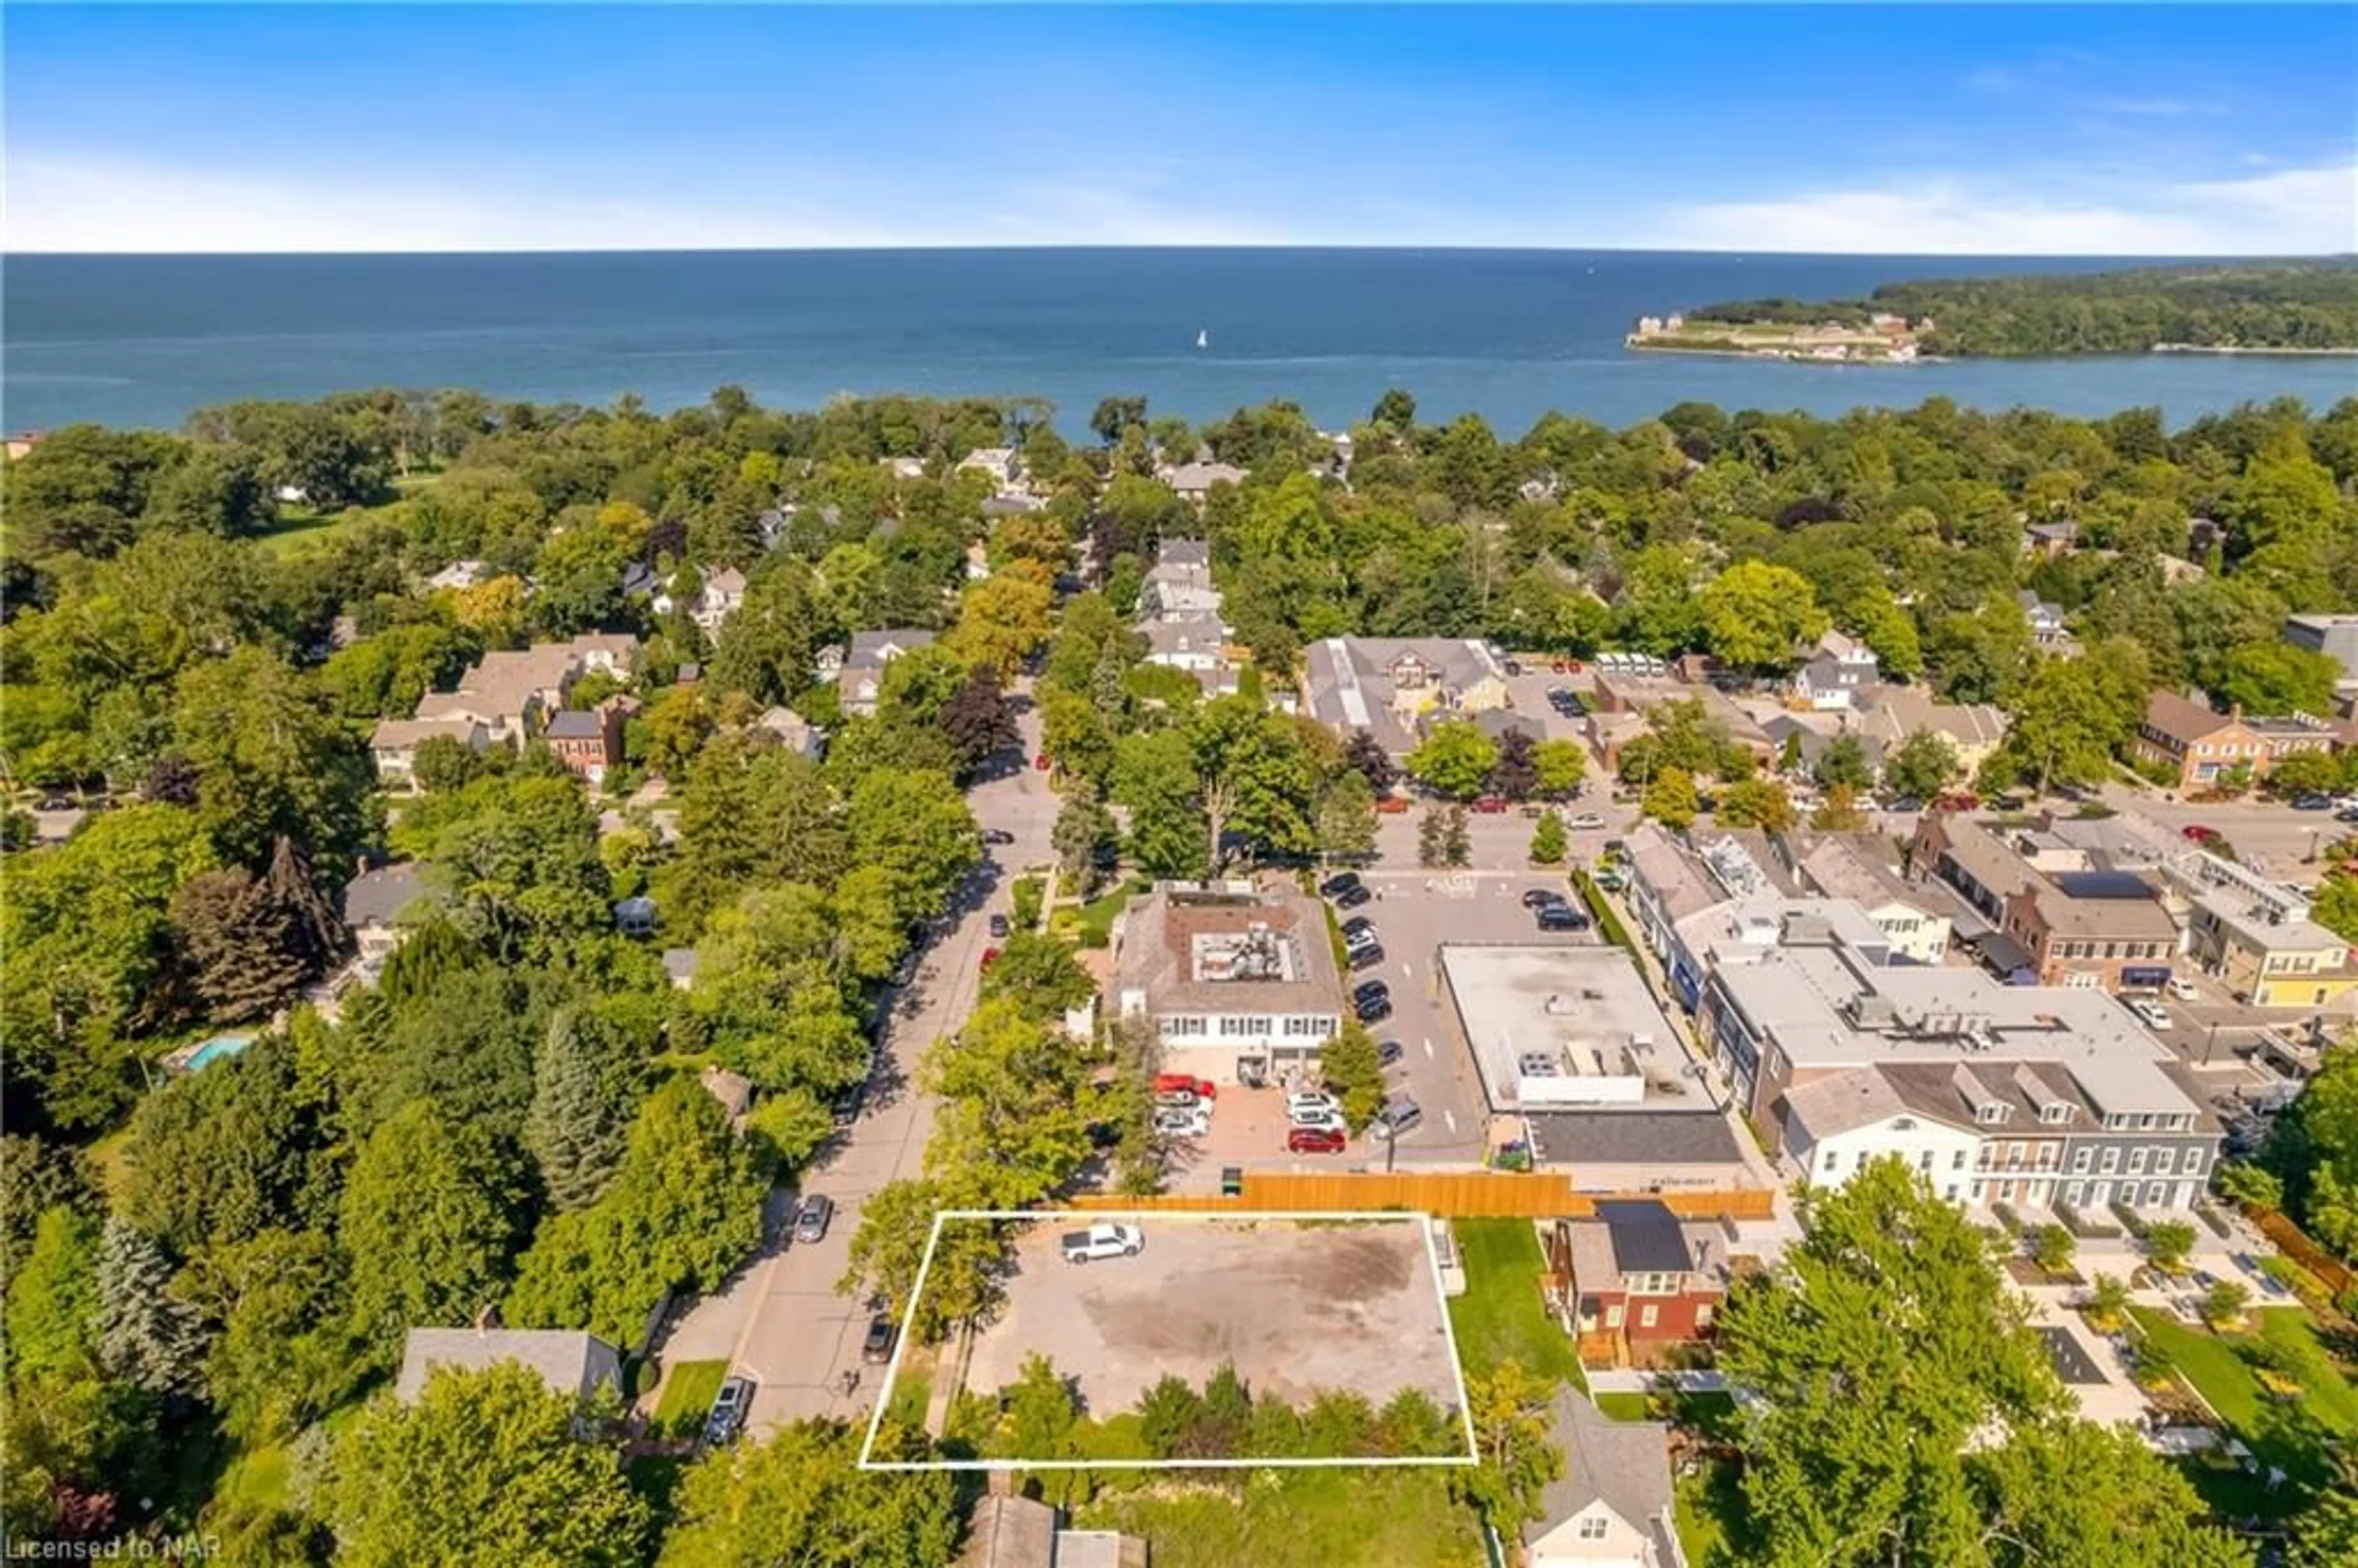 Lakeview for 222 Gate St, Niagara-on-the-Lake Ontario L0S 1J0